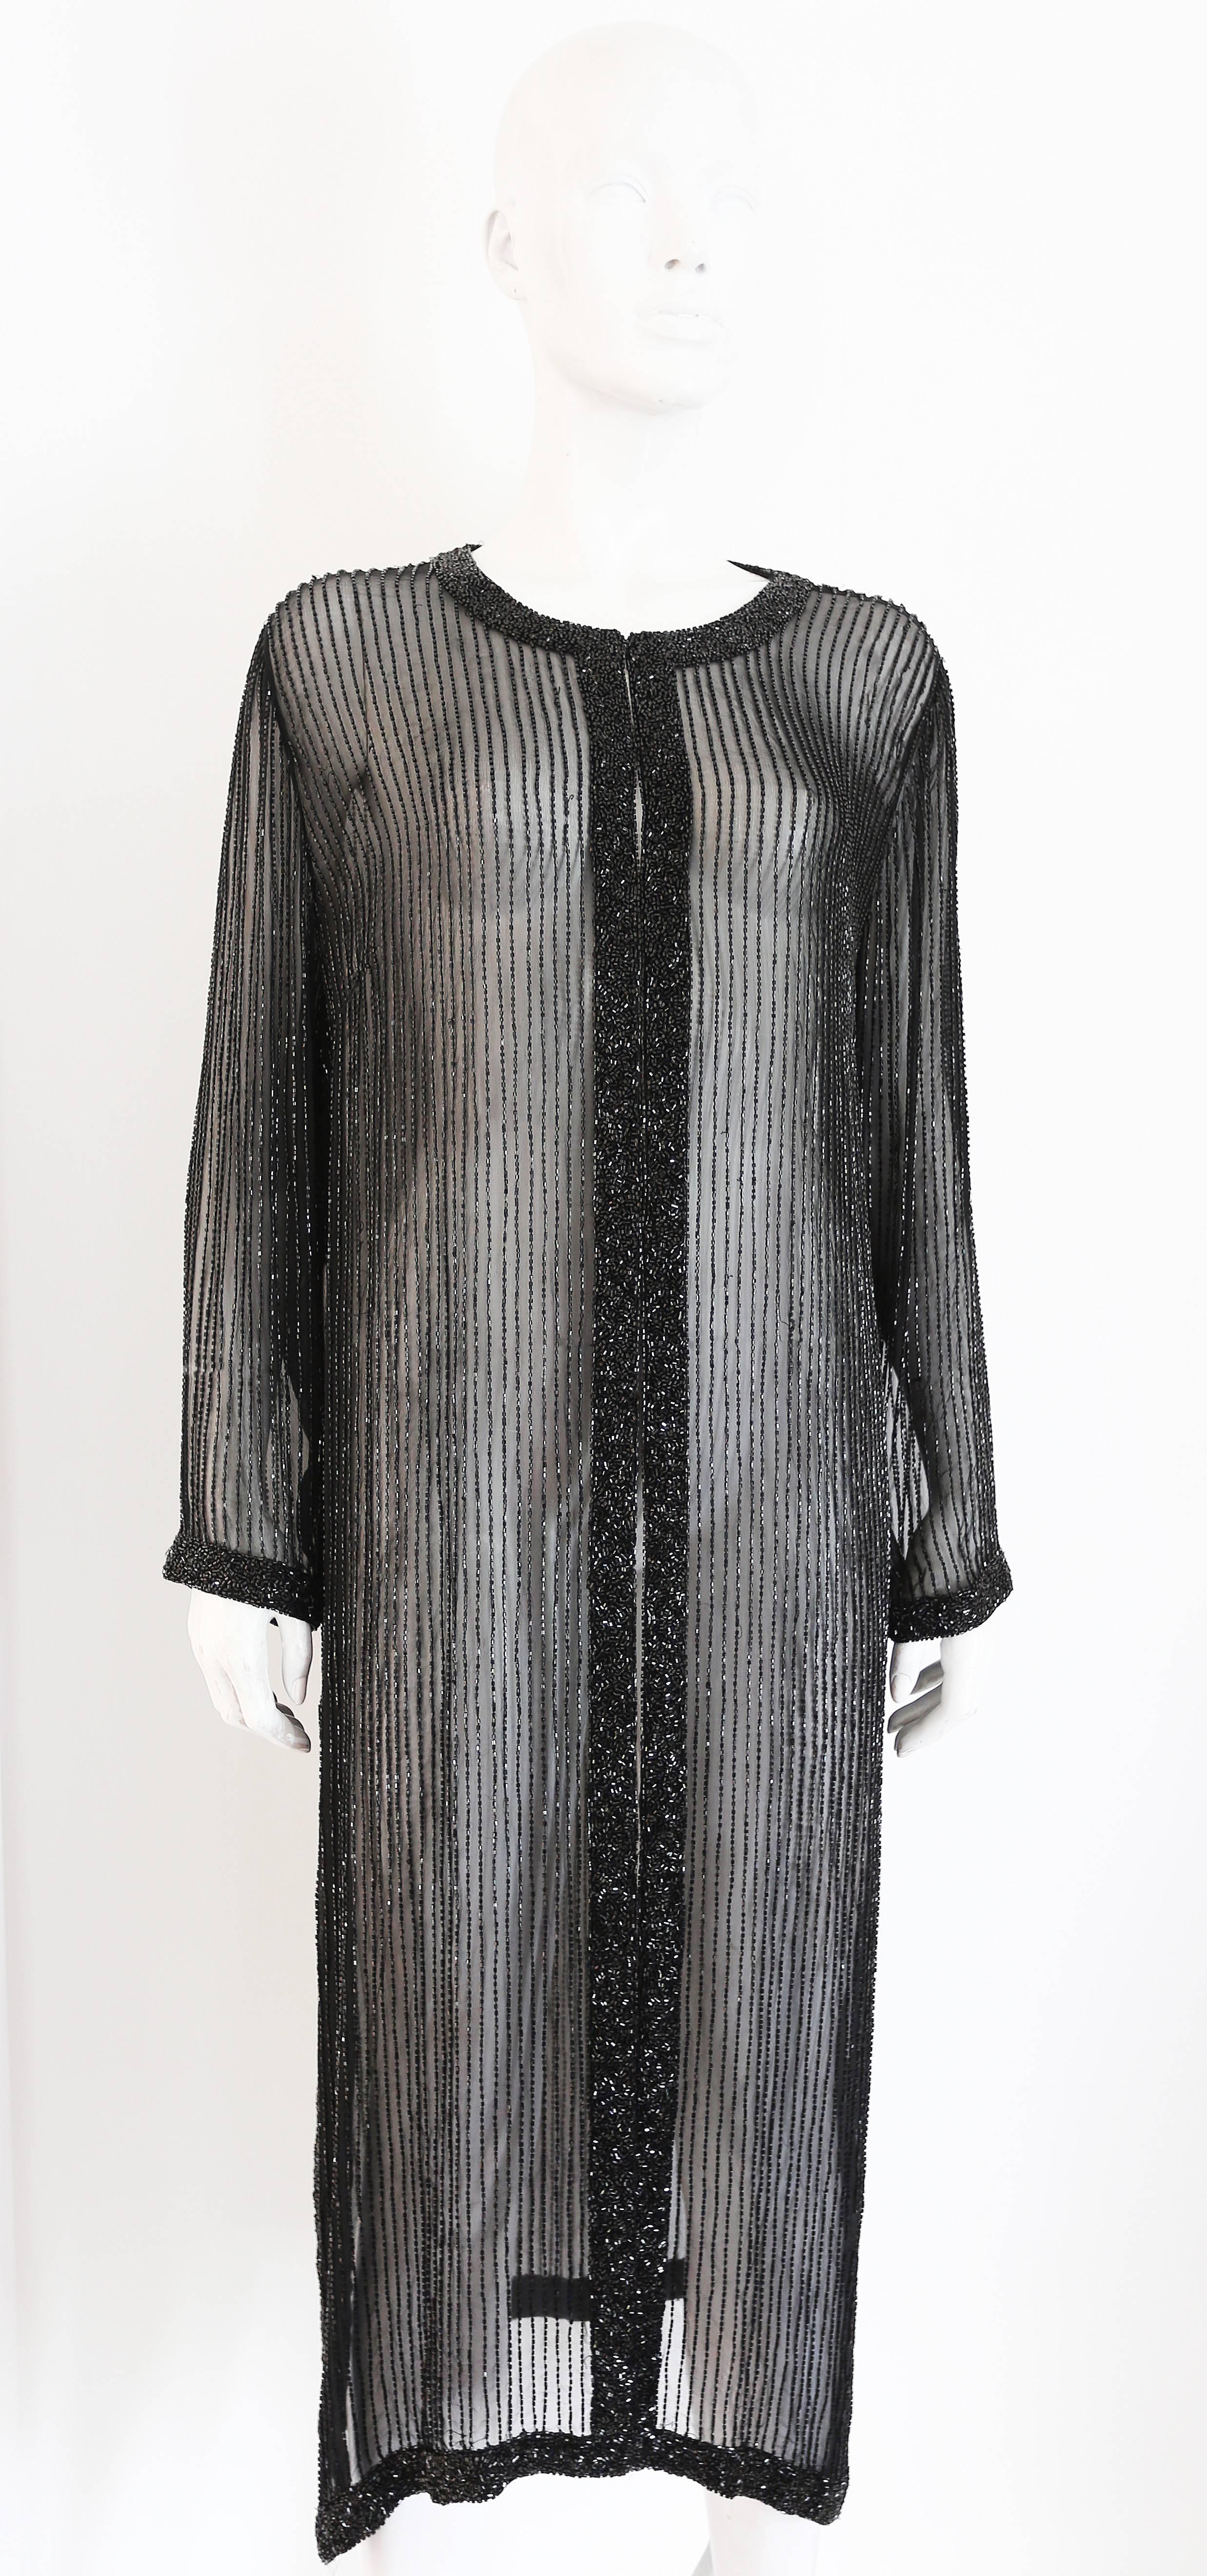 Bergdorf Goodman beaded silk chiffon evening dress coat in a 1920s style, circa  1990s. The coat features hook and eye closure, side slits and thousands of hand sewn decorative beads. 

